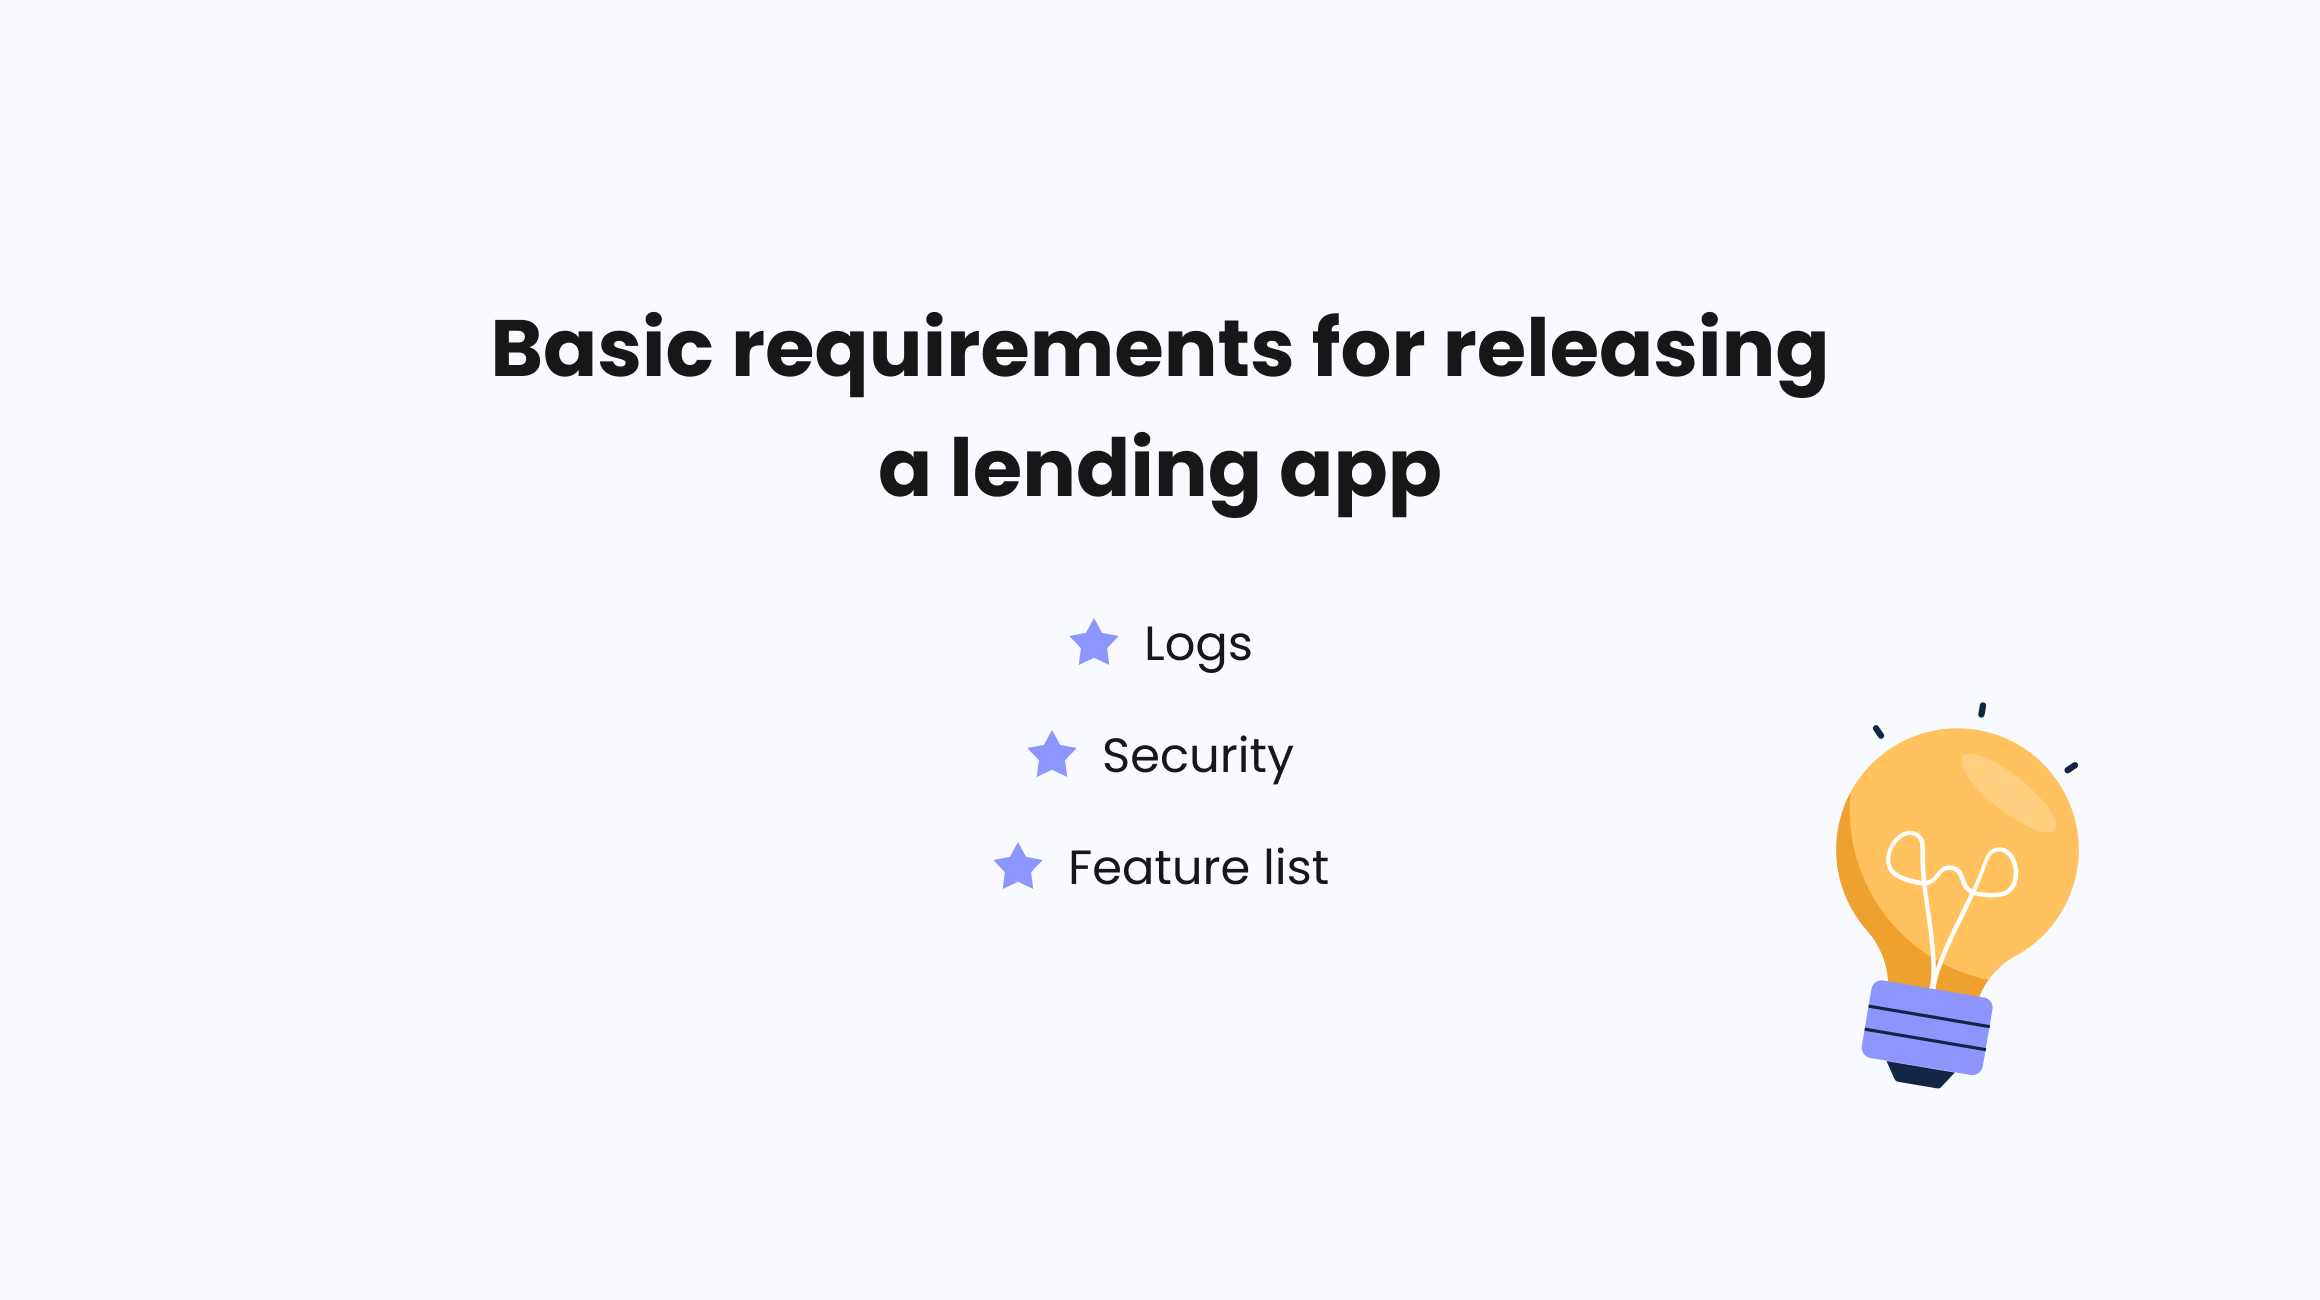 Requirements for a lending app